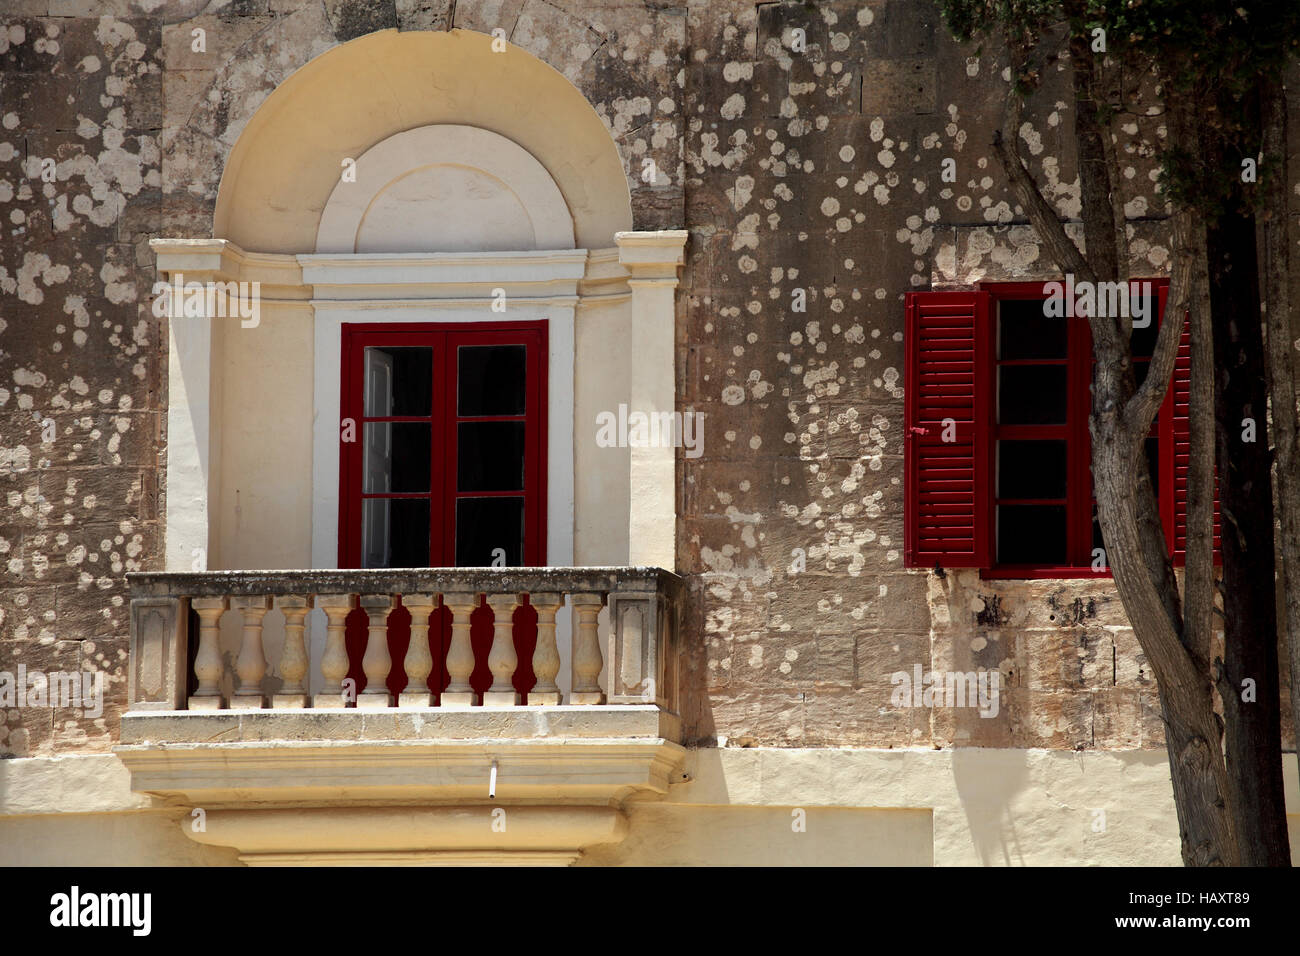 Landscape view of window with balcony and red shutters and tree Stock Photo